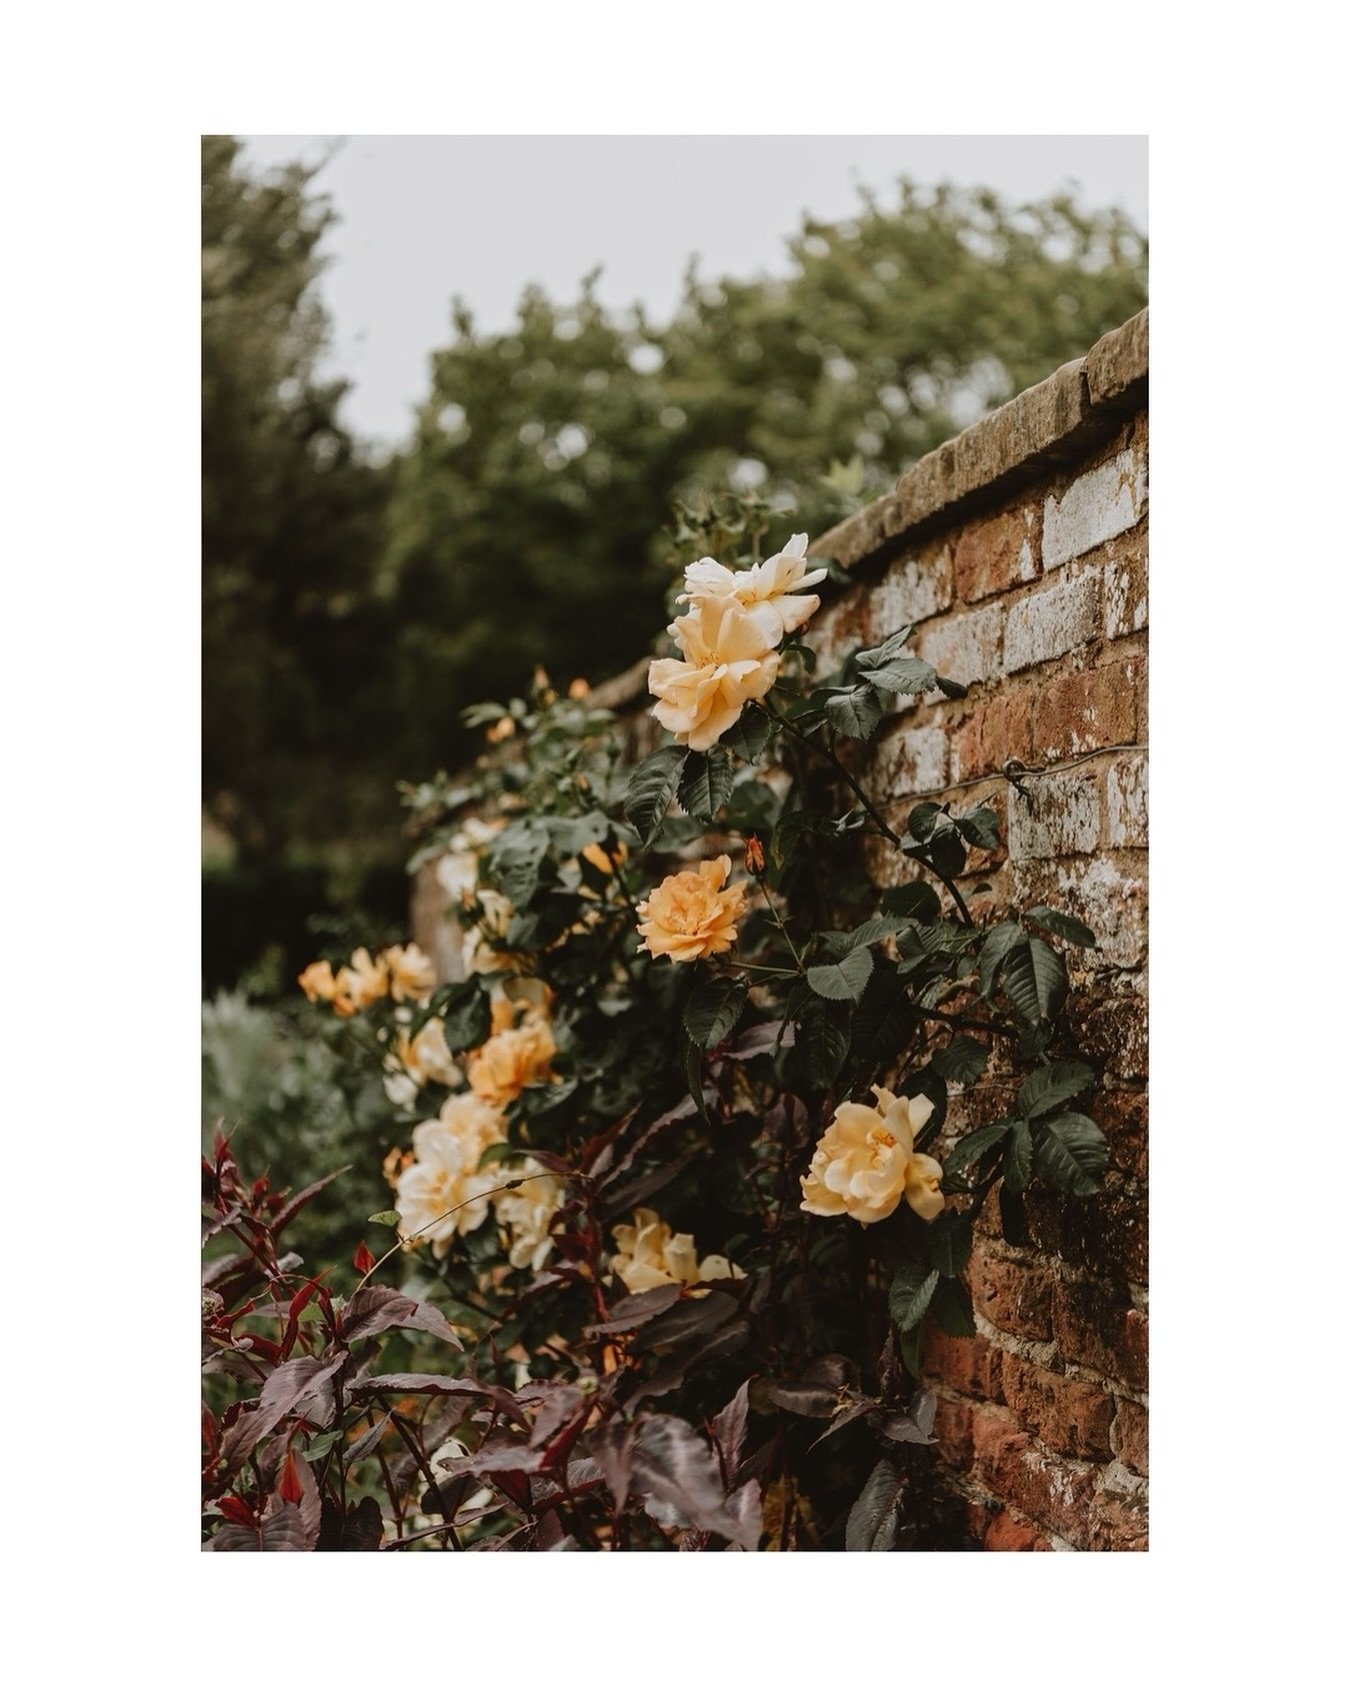 There isn&rsquo;t much lovelier than roses growing on an old brick wall is there?

#roses #gardenphotography #gardenphotographer #flowerphotography